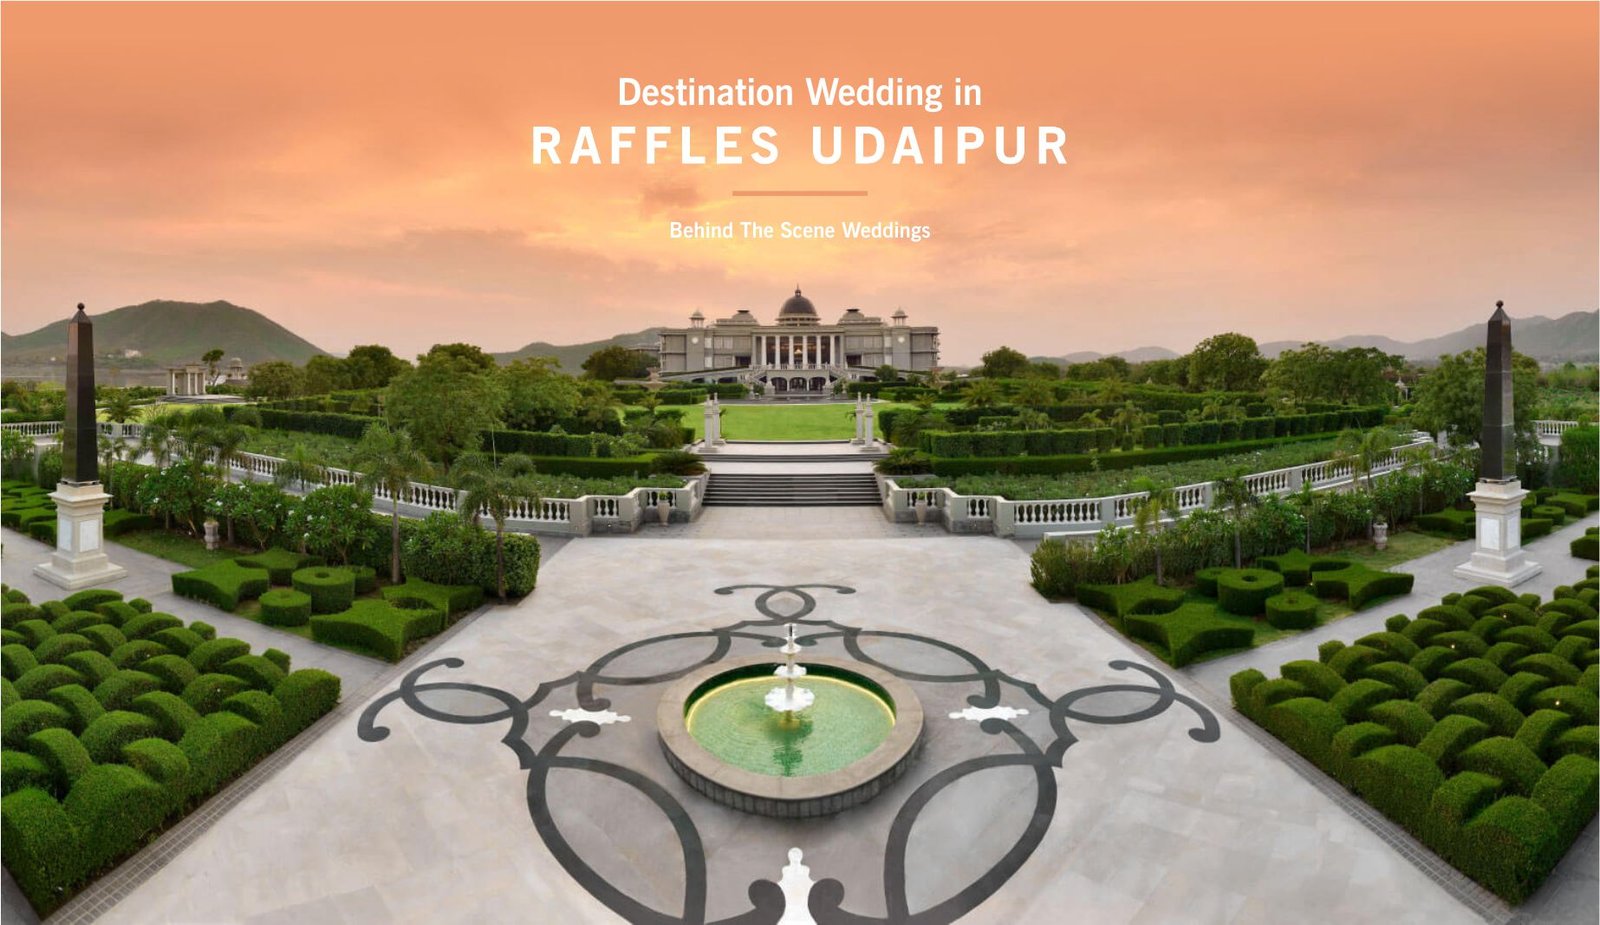 Cost of Destination Wedding at Raffles Udaipur - Behind The Scene